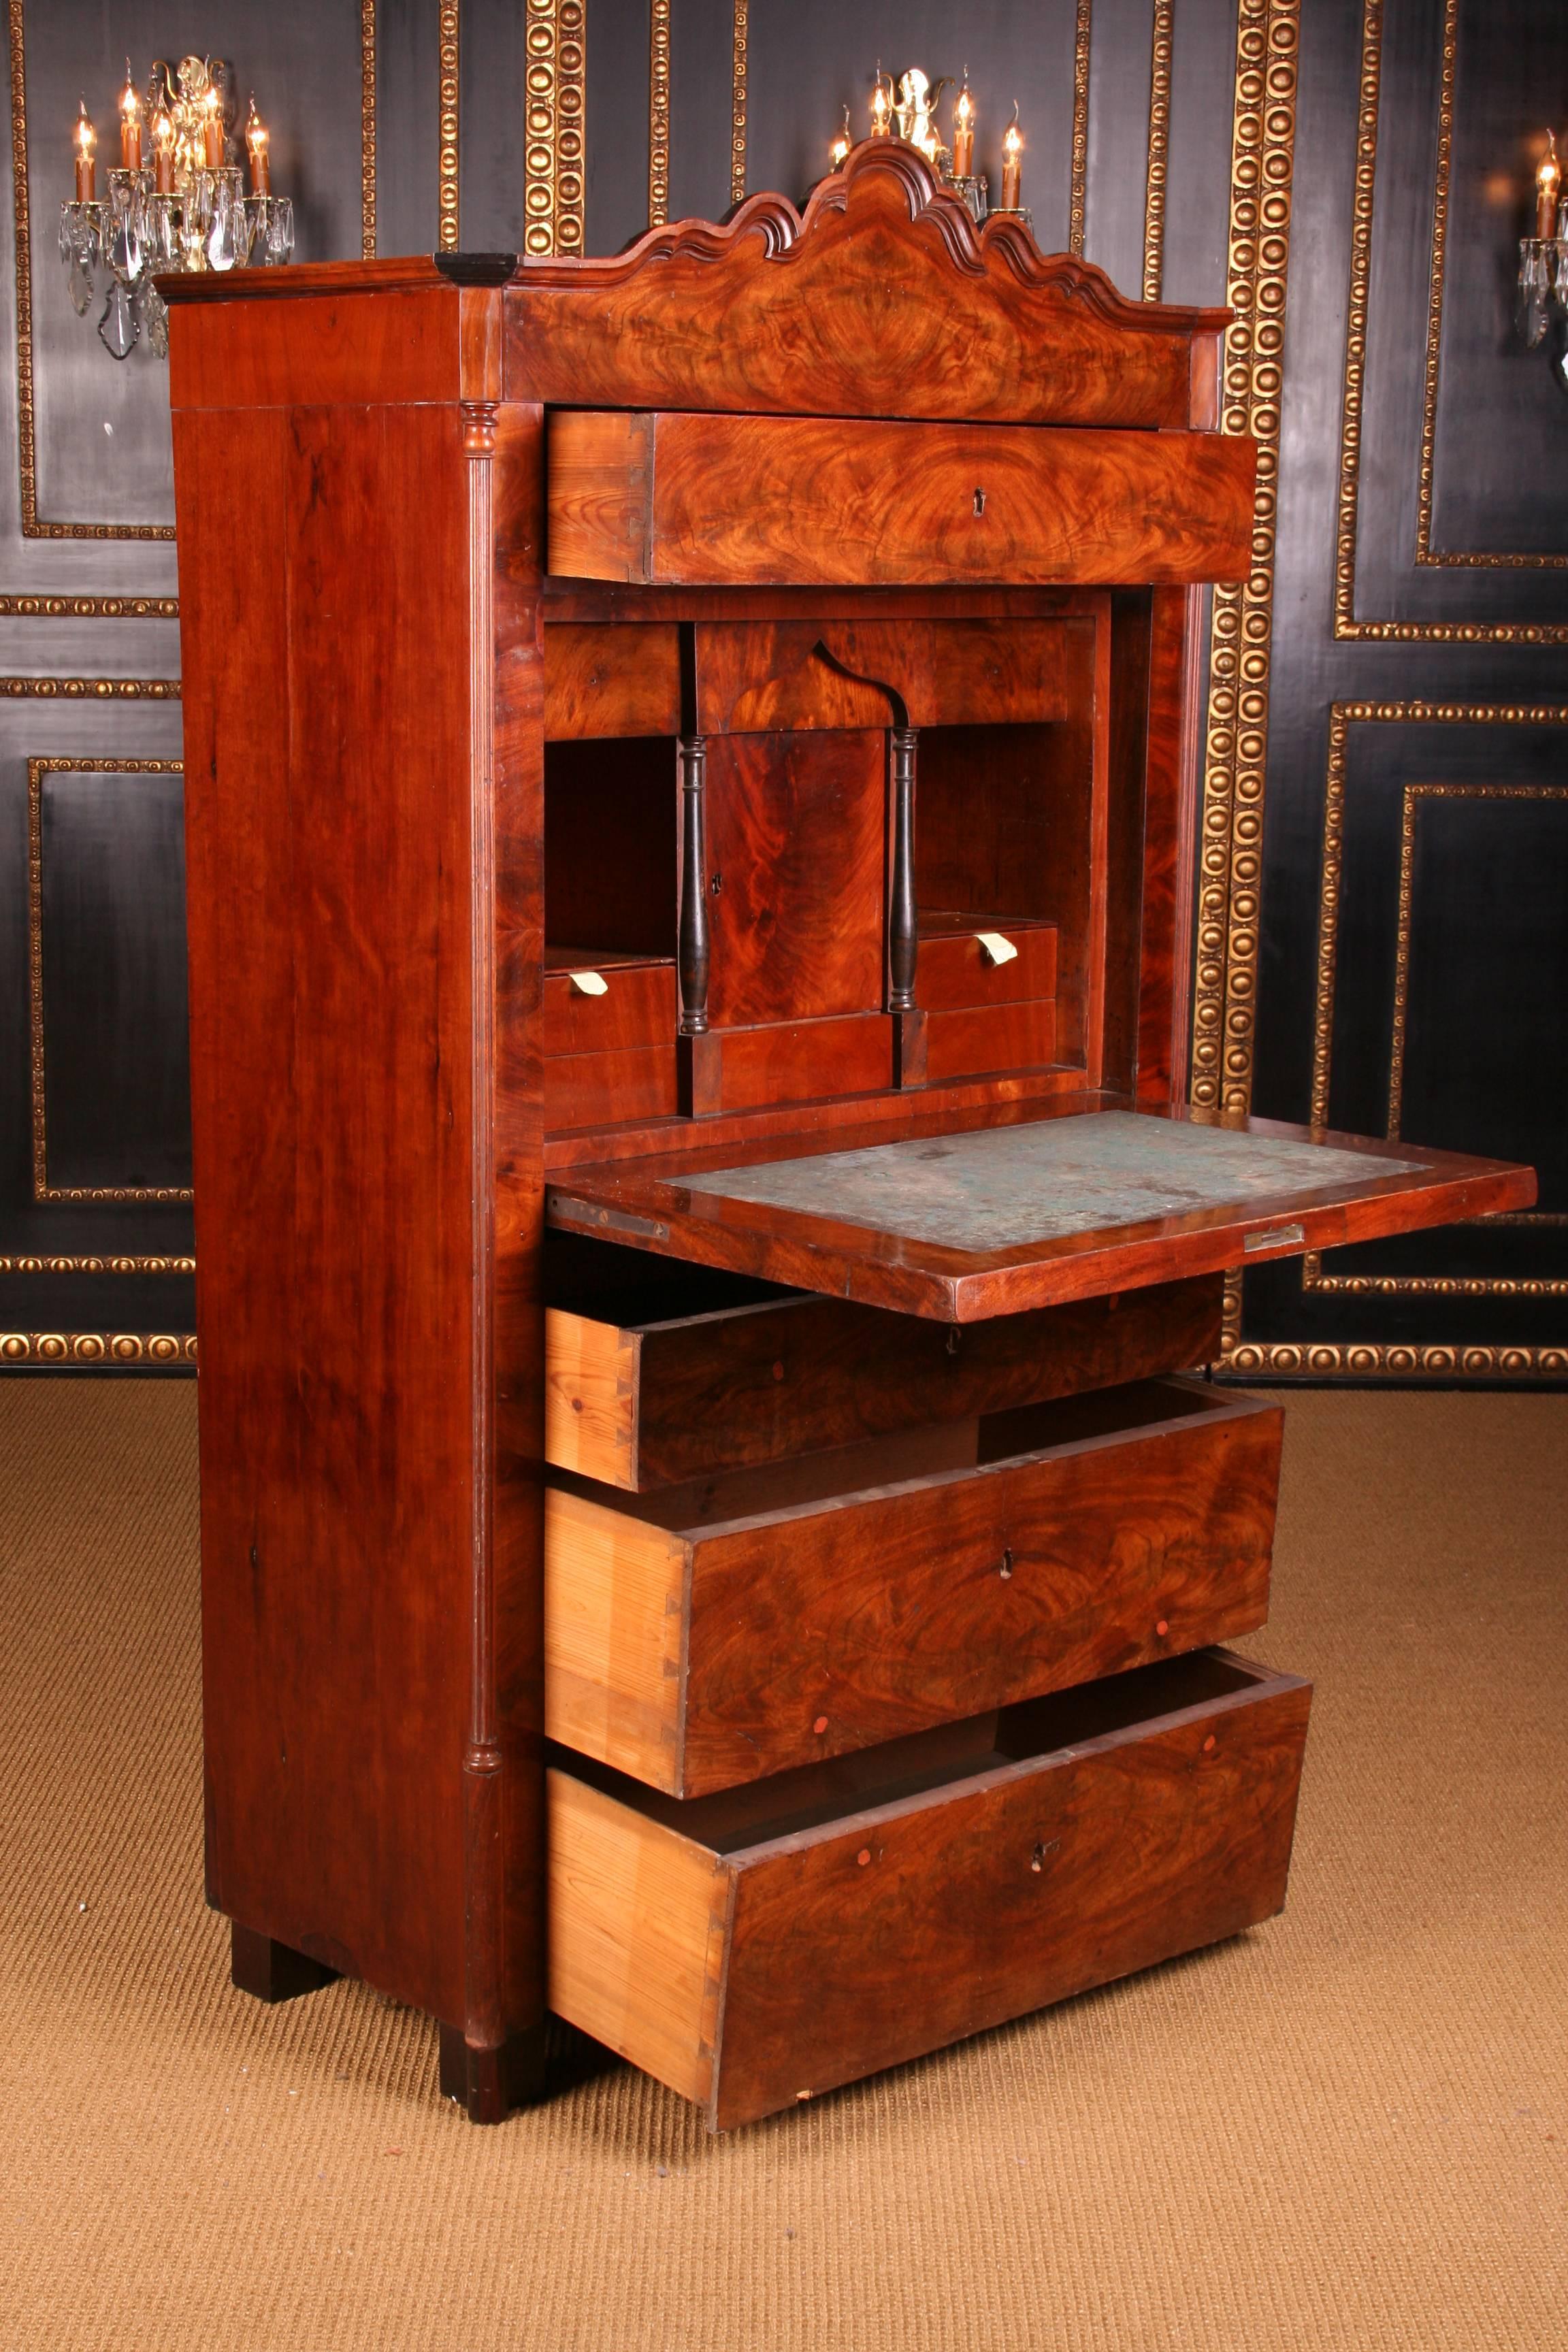 Mahogany on solid pinewood. High-right body on block-feet. Straight writing plate with a medaillion-shaped depression. Behind it, architecturally designed interior. Curved cornice, flanked by Amphora-shaped ornamental elements. This secretaire is in